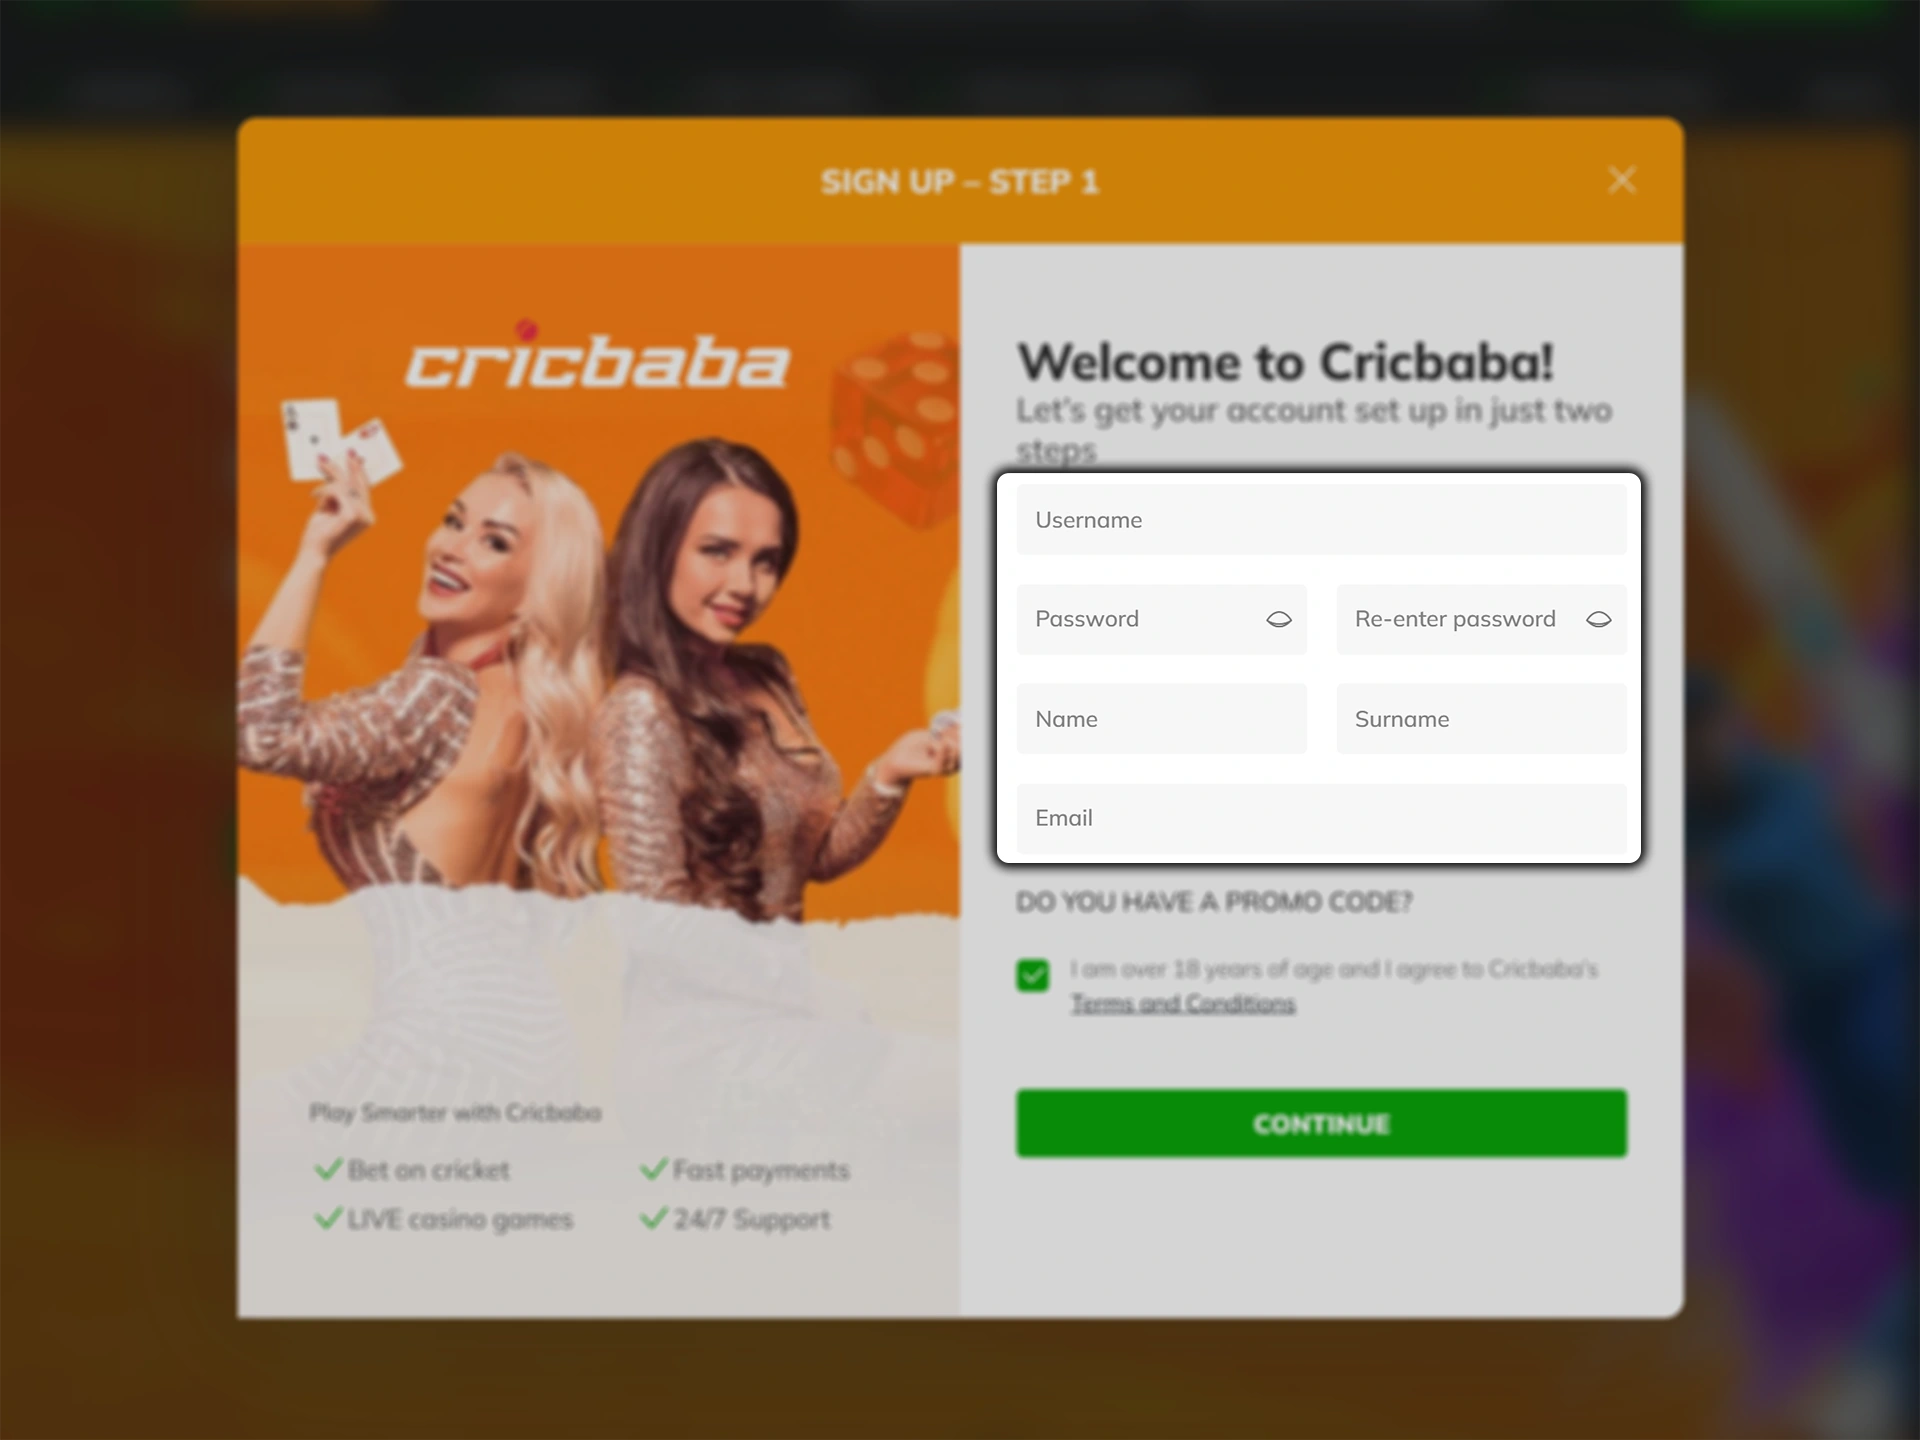 Create your Cricbaba account login details and fill in all the fields.